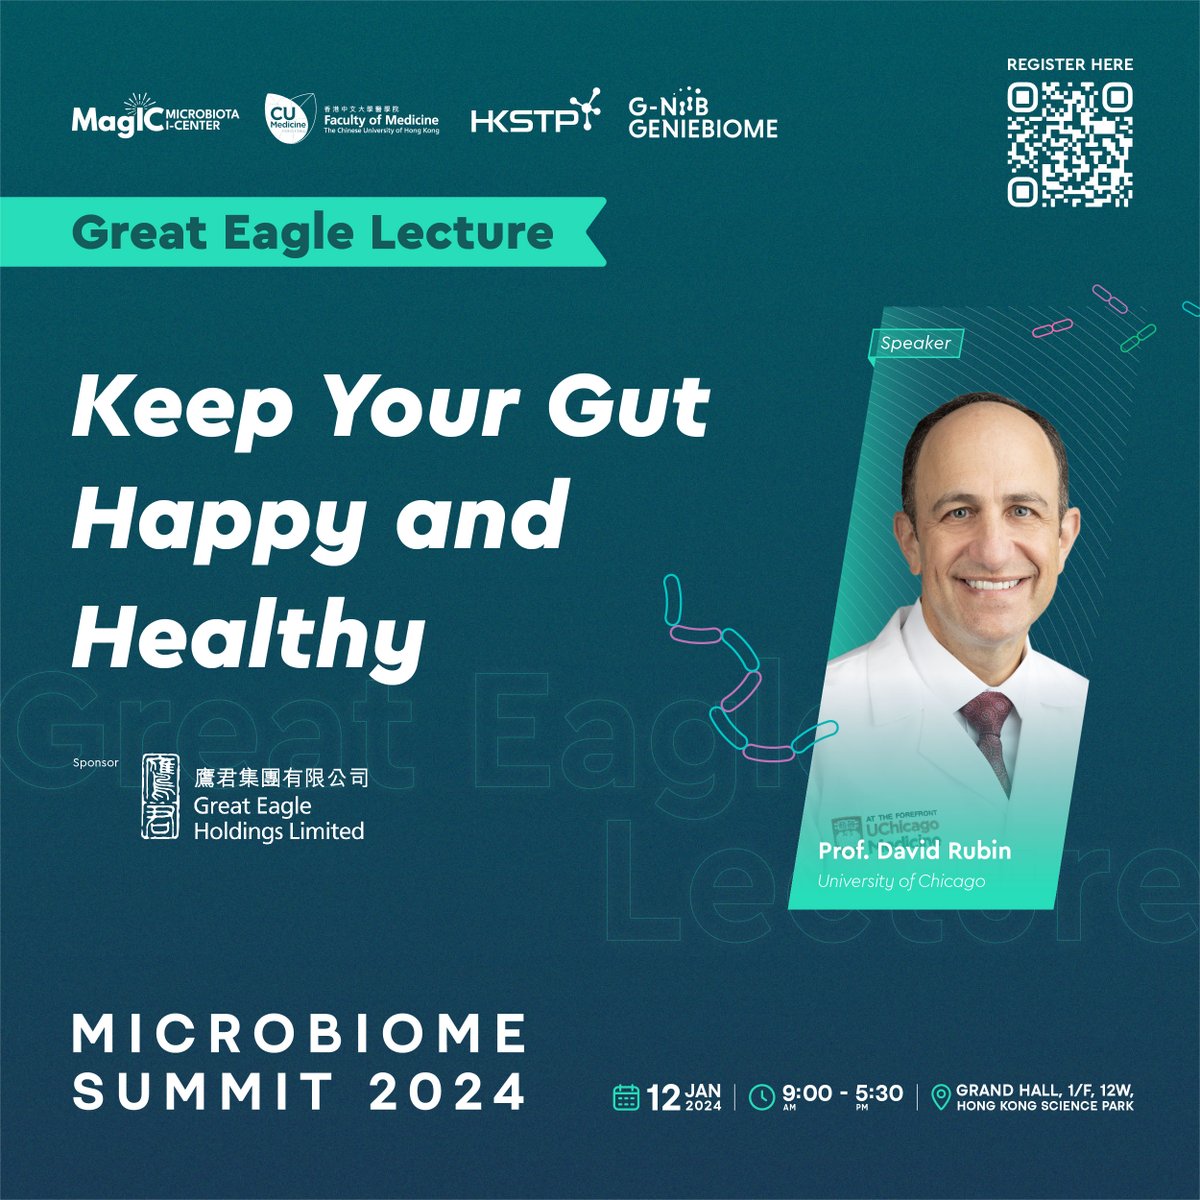 🌟Great Eagle Lecture - Microbiome Summit 2024 (Sponsored by Great Eagle Holdings Limited) 🗓️12 Jan 2024 🕒AM Session 📍 The Grand Hall 12W HKSTP 📷Topic: Keep Your Gut Happy and Healthy 🎟️lnkd.in/gxF4hGyr 🎙️Speaker: 👨‍🔬 Prof. David Rubin @IBDMD, University of Chicago